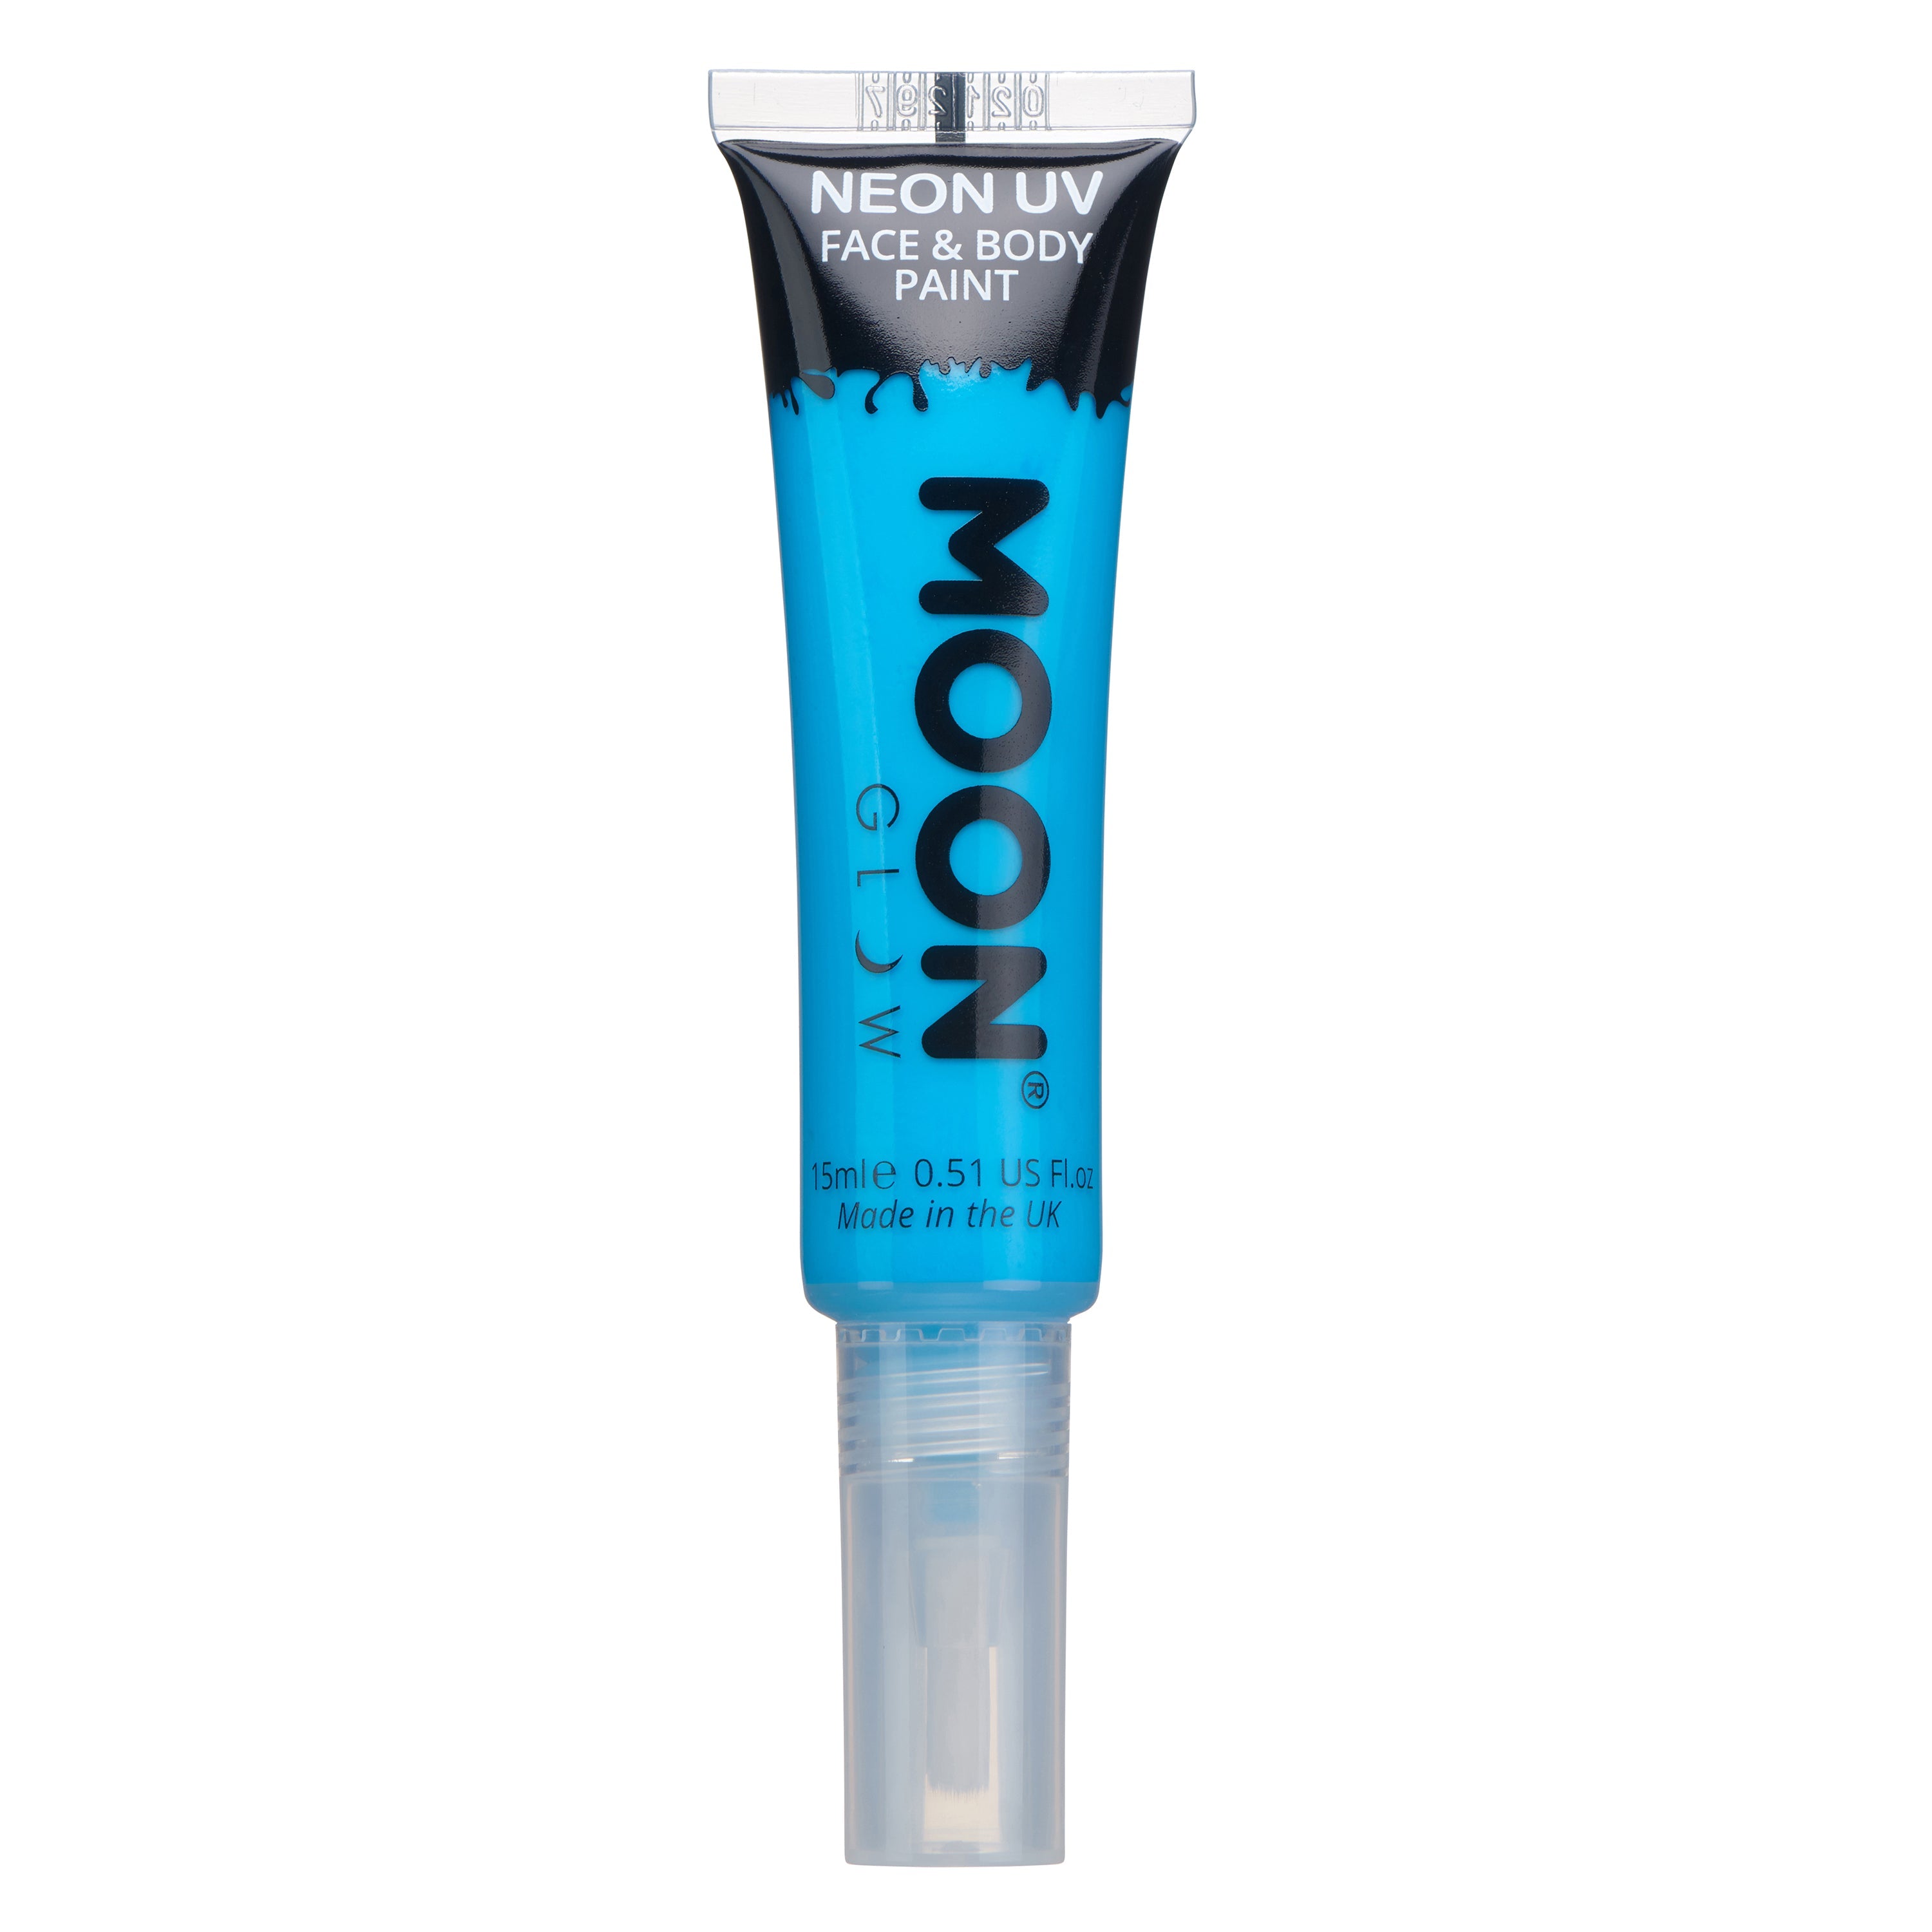 Intense Blue - Neon UV Glow Blacklight Face & Body Paint Makeup w/Brush, 15mL. Cosmetically certified, FDA & Health Canada compliant, cruelty free and vegan.